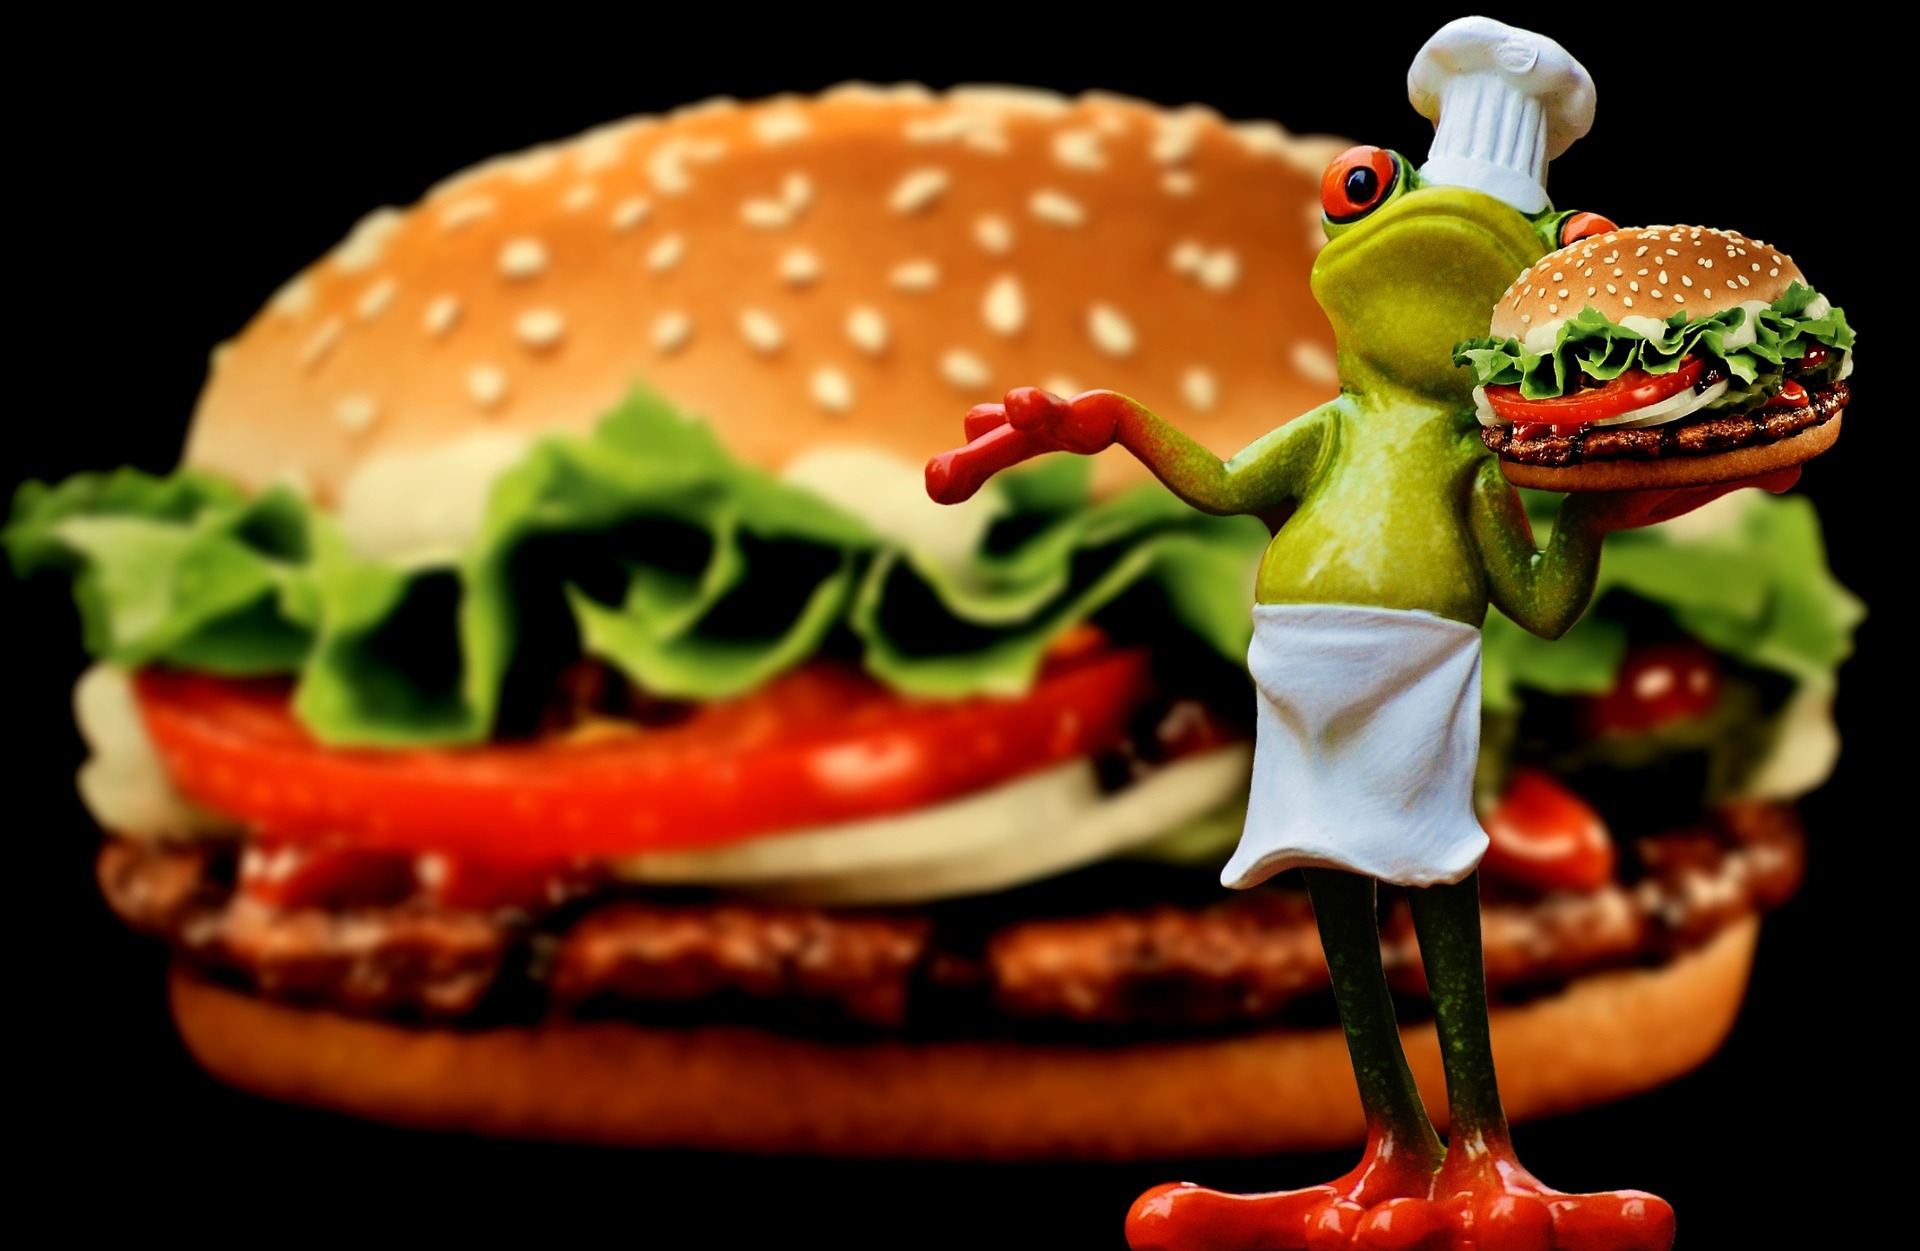 Hamburger with dancing frog in chef's skirt